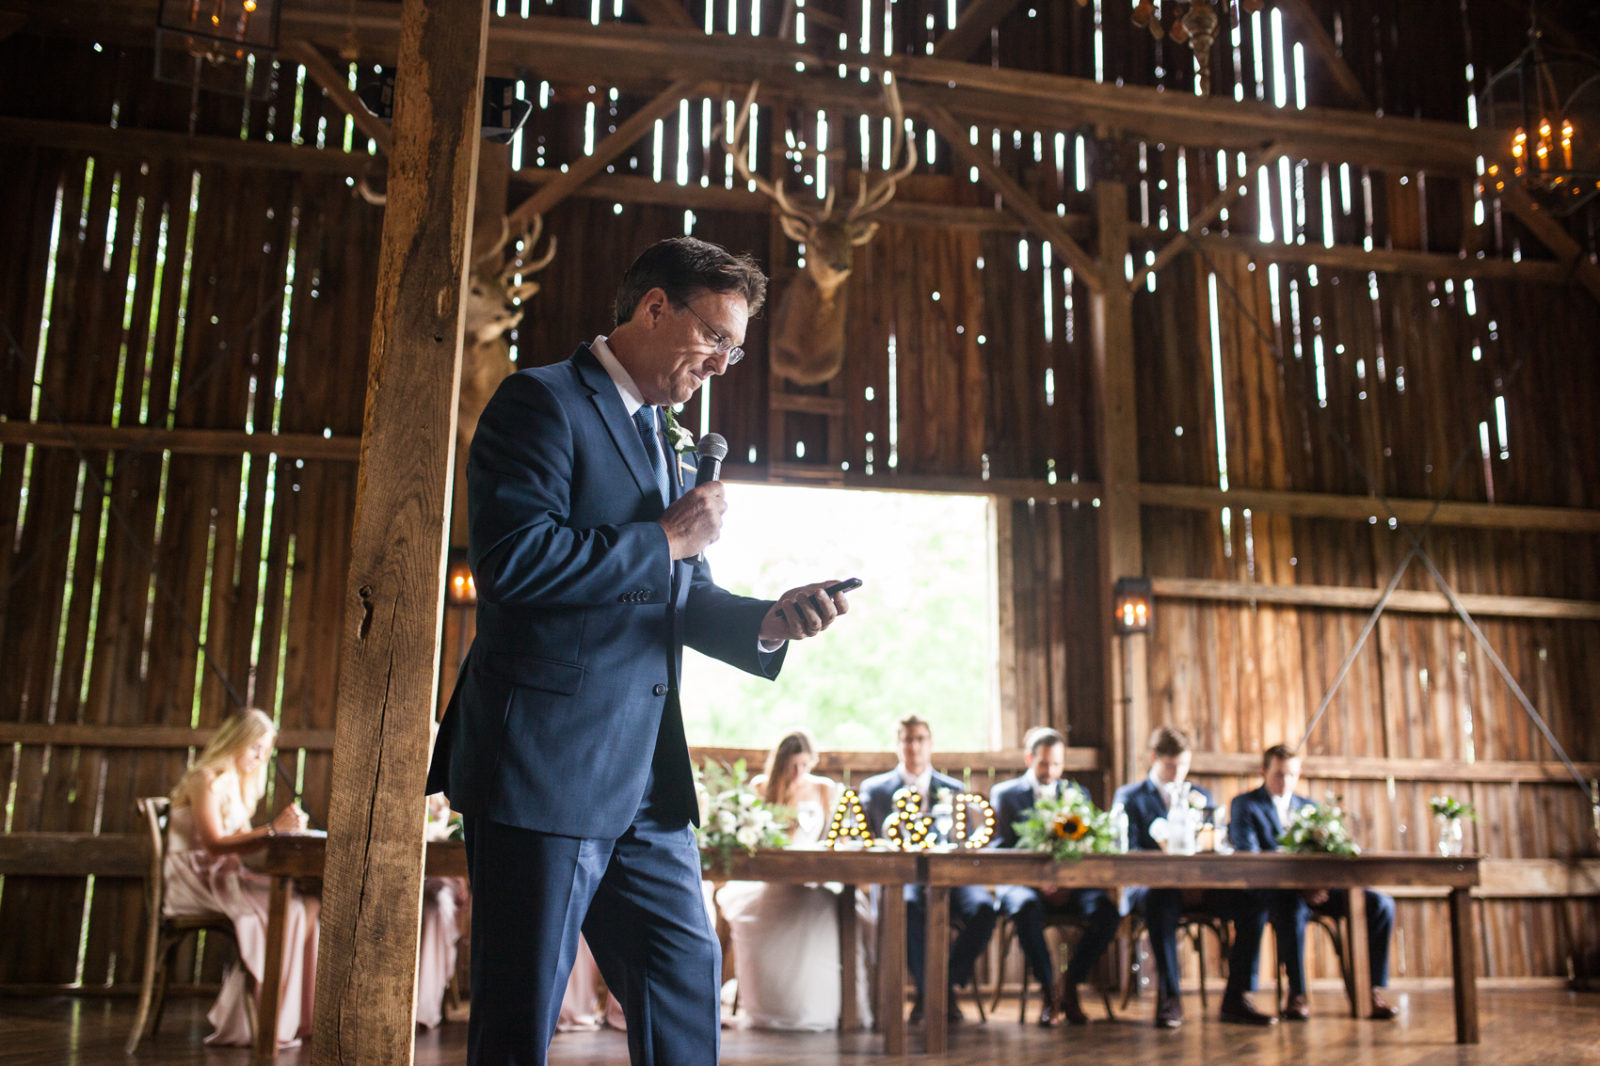 speeches during wedding reception in the barn of The Farm at Dover